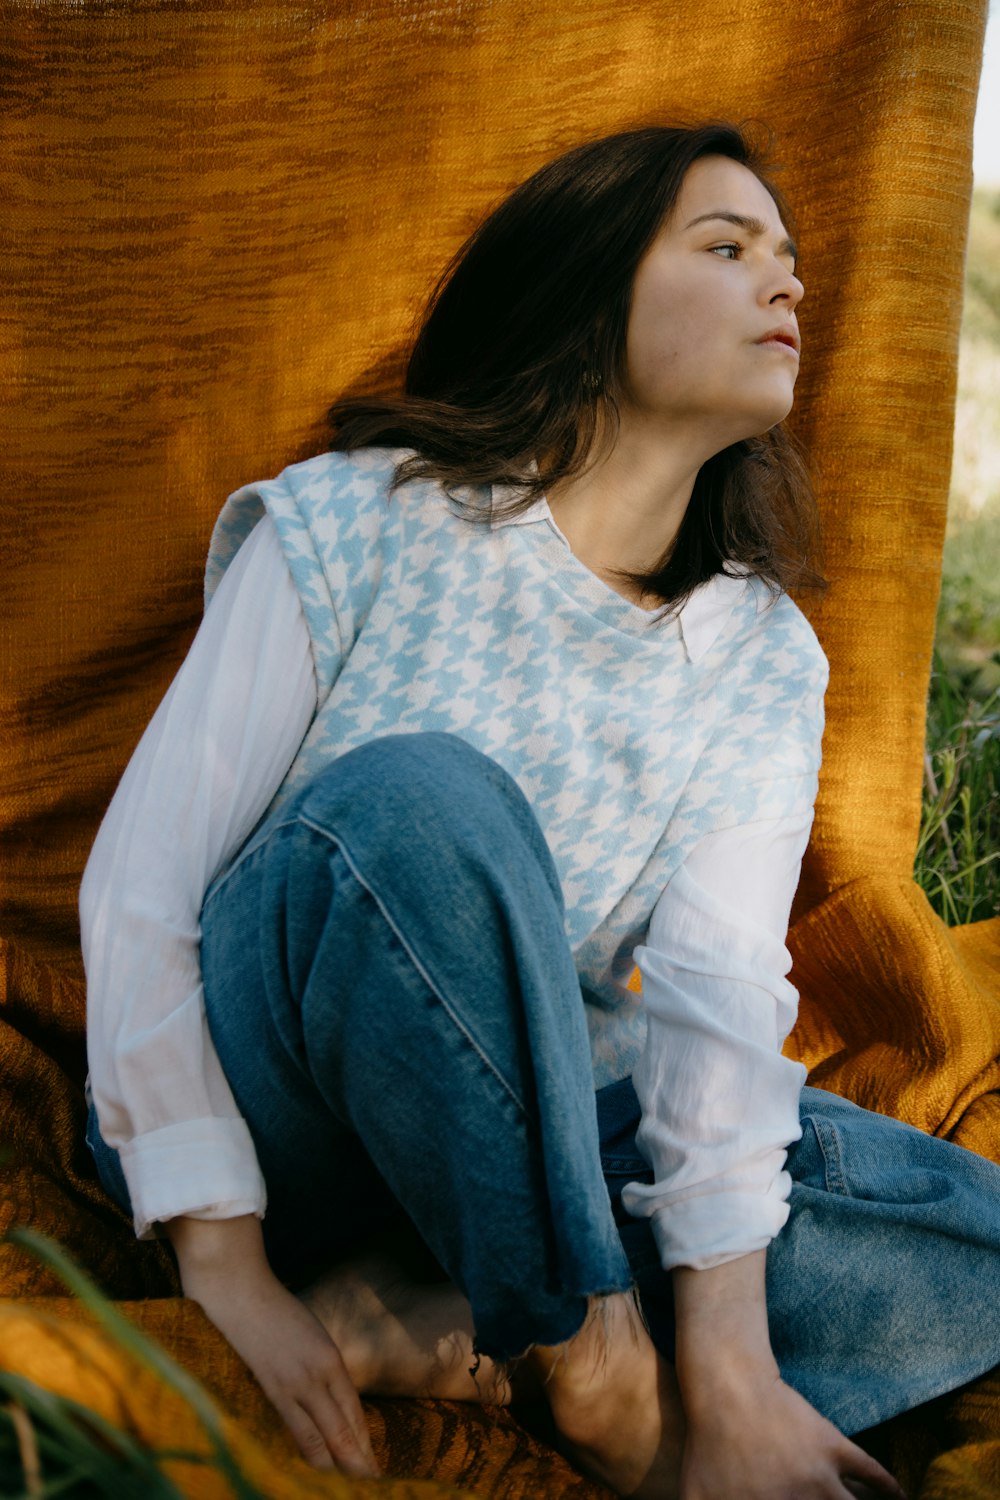 woman in white and blue long sleeve shirt and blue denim jeans sitting on brown wooden